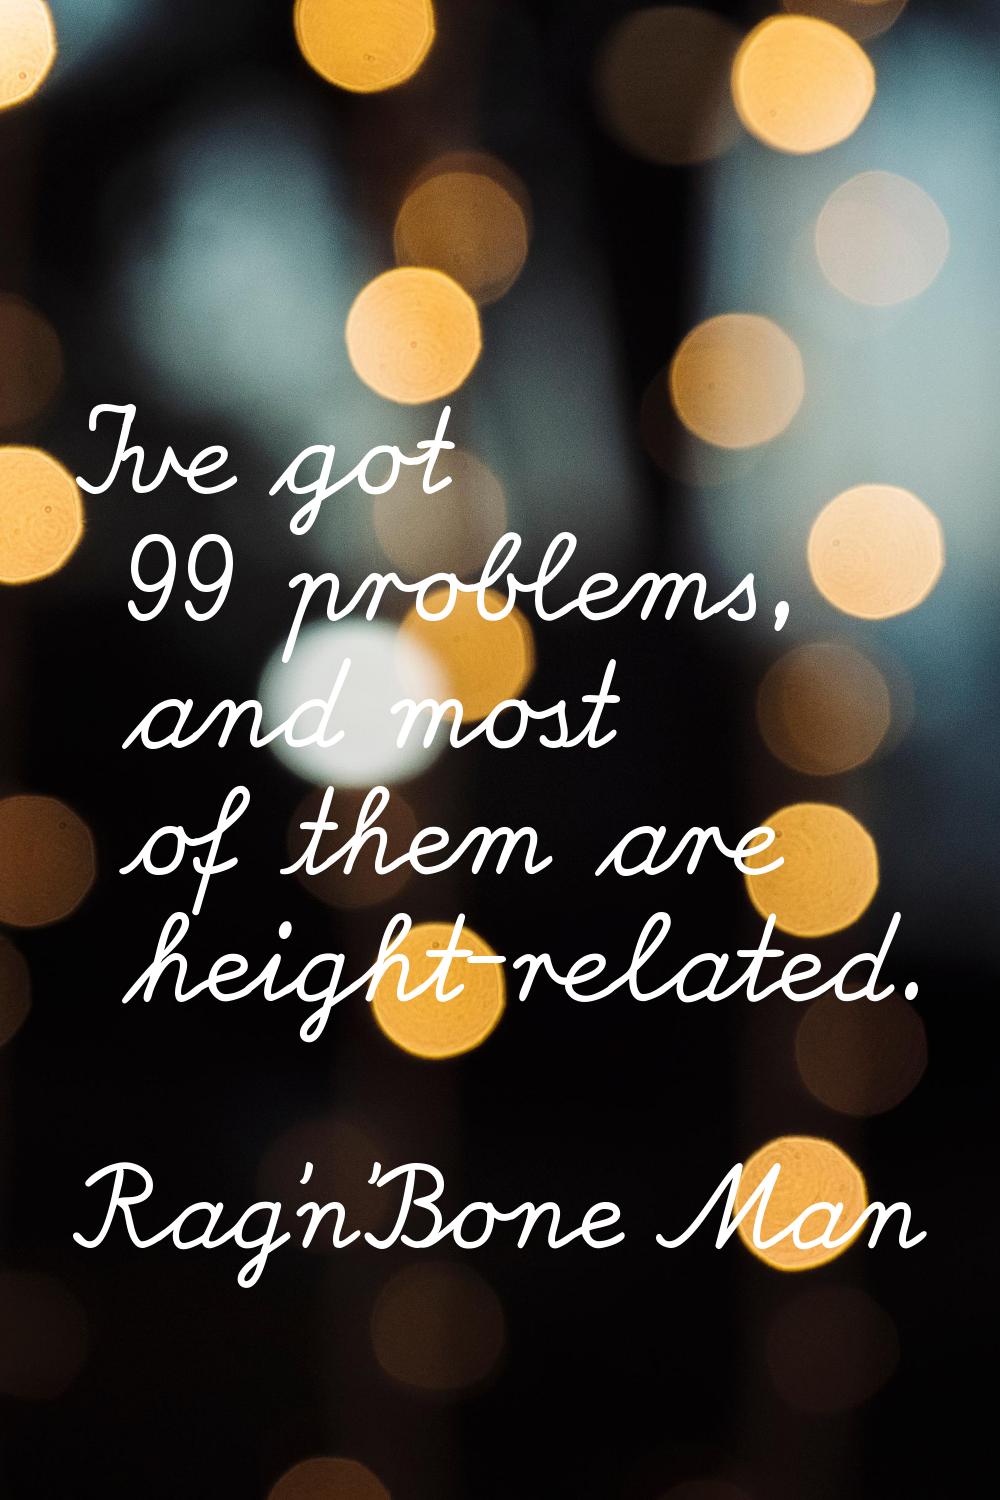 I've got 99 problems, and most of them are height-related.